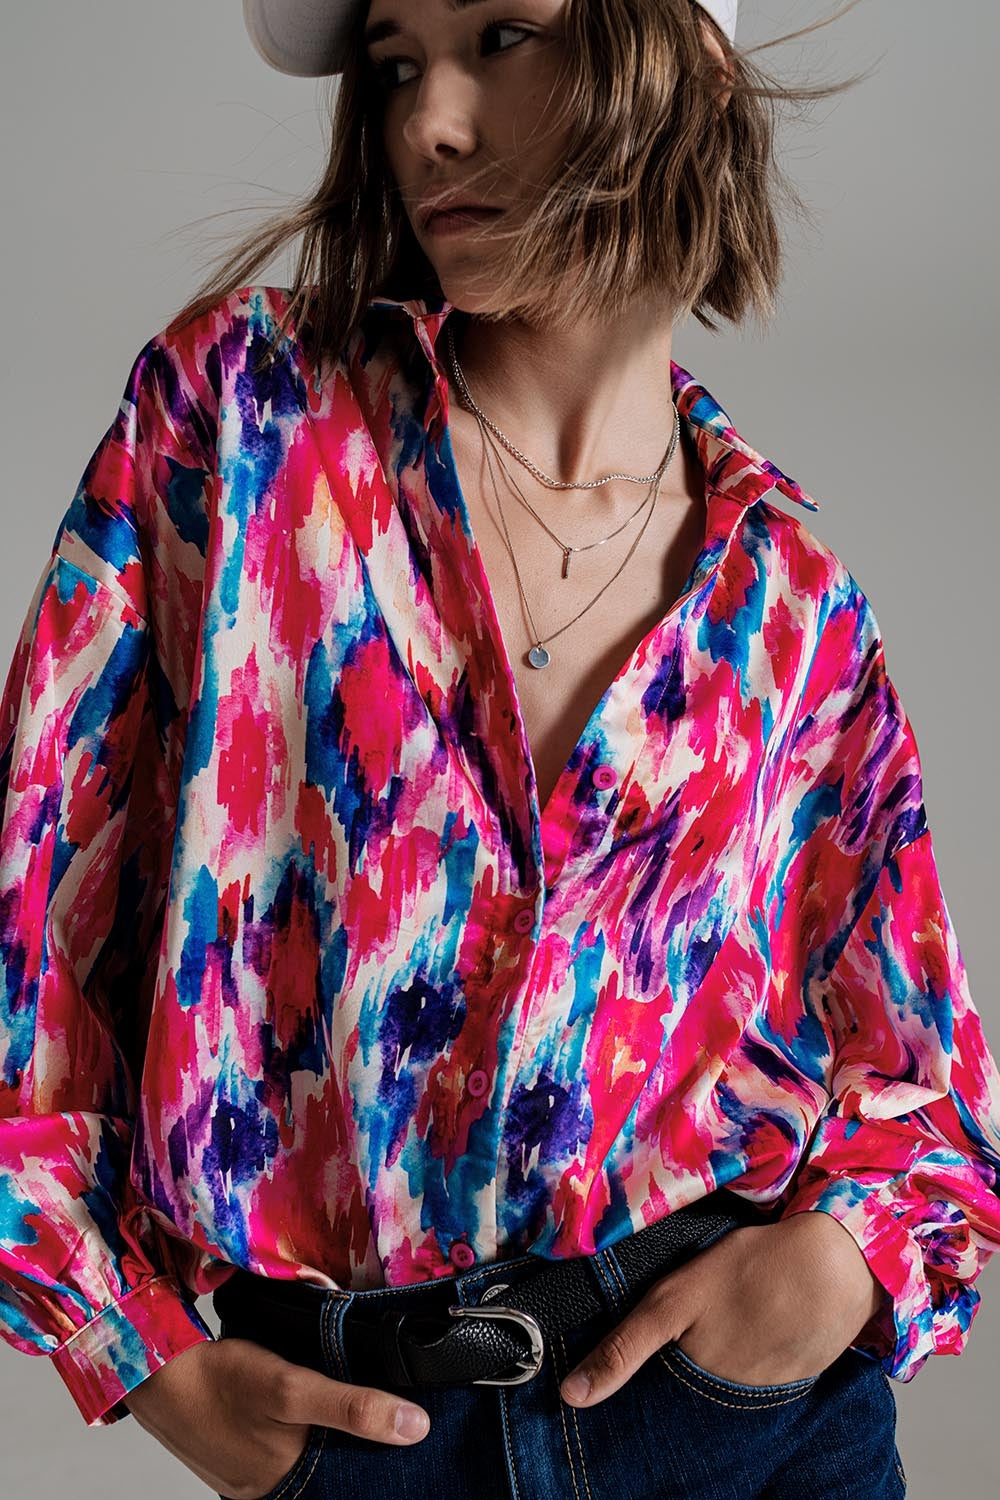 Oversized Button Down Shirt In Abstract Pink And Blue Print - Szua Store